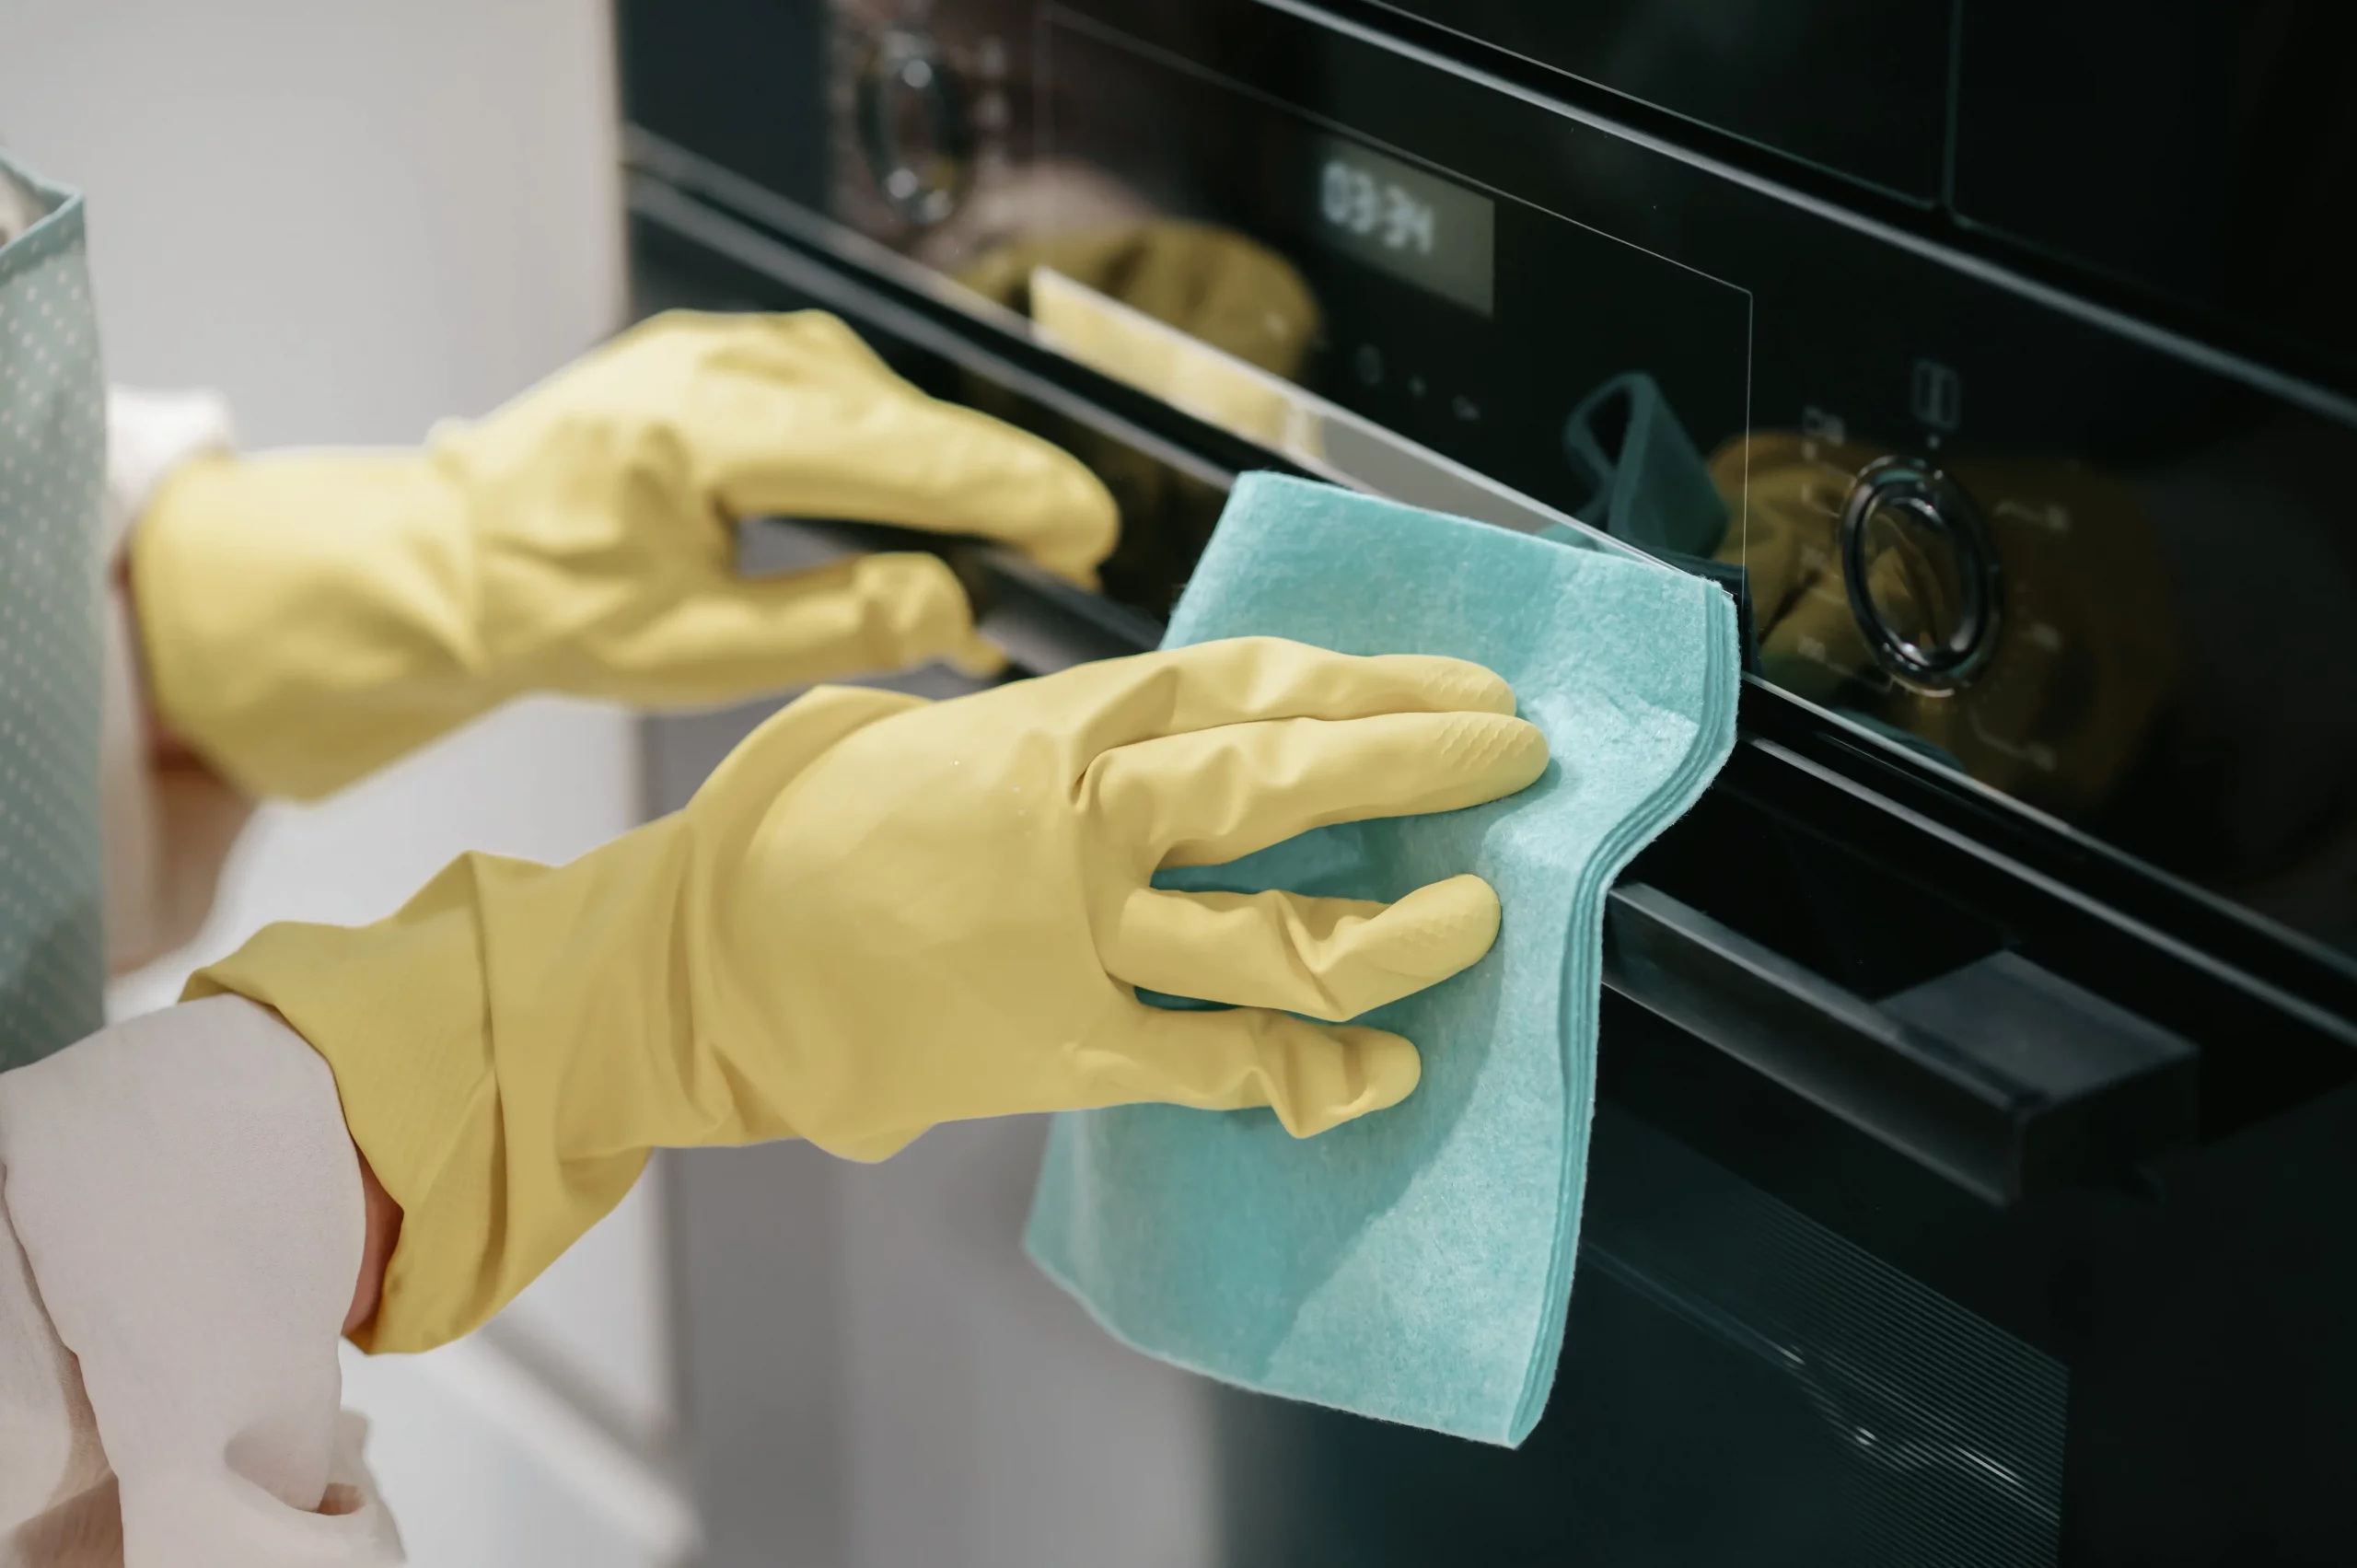 Exceptional Oven Cleaning Services